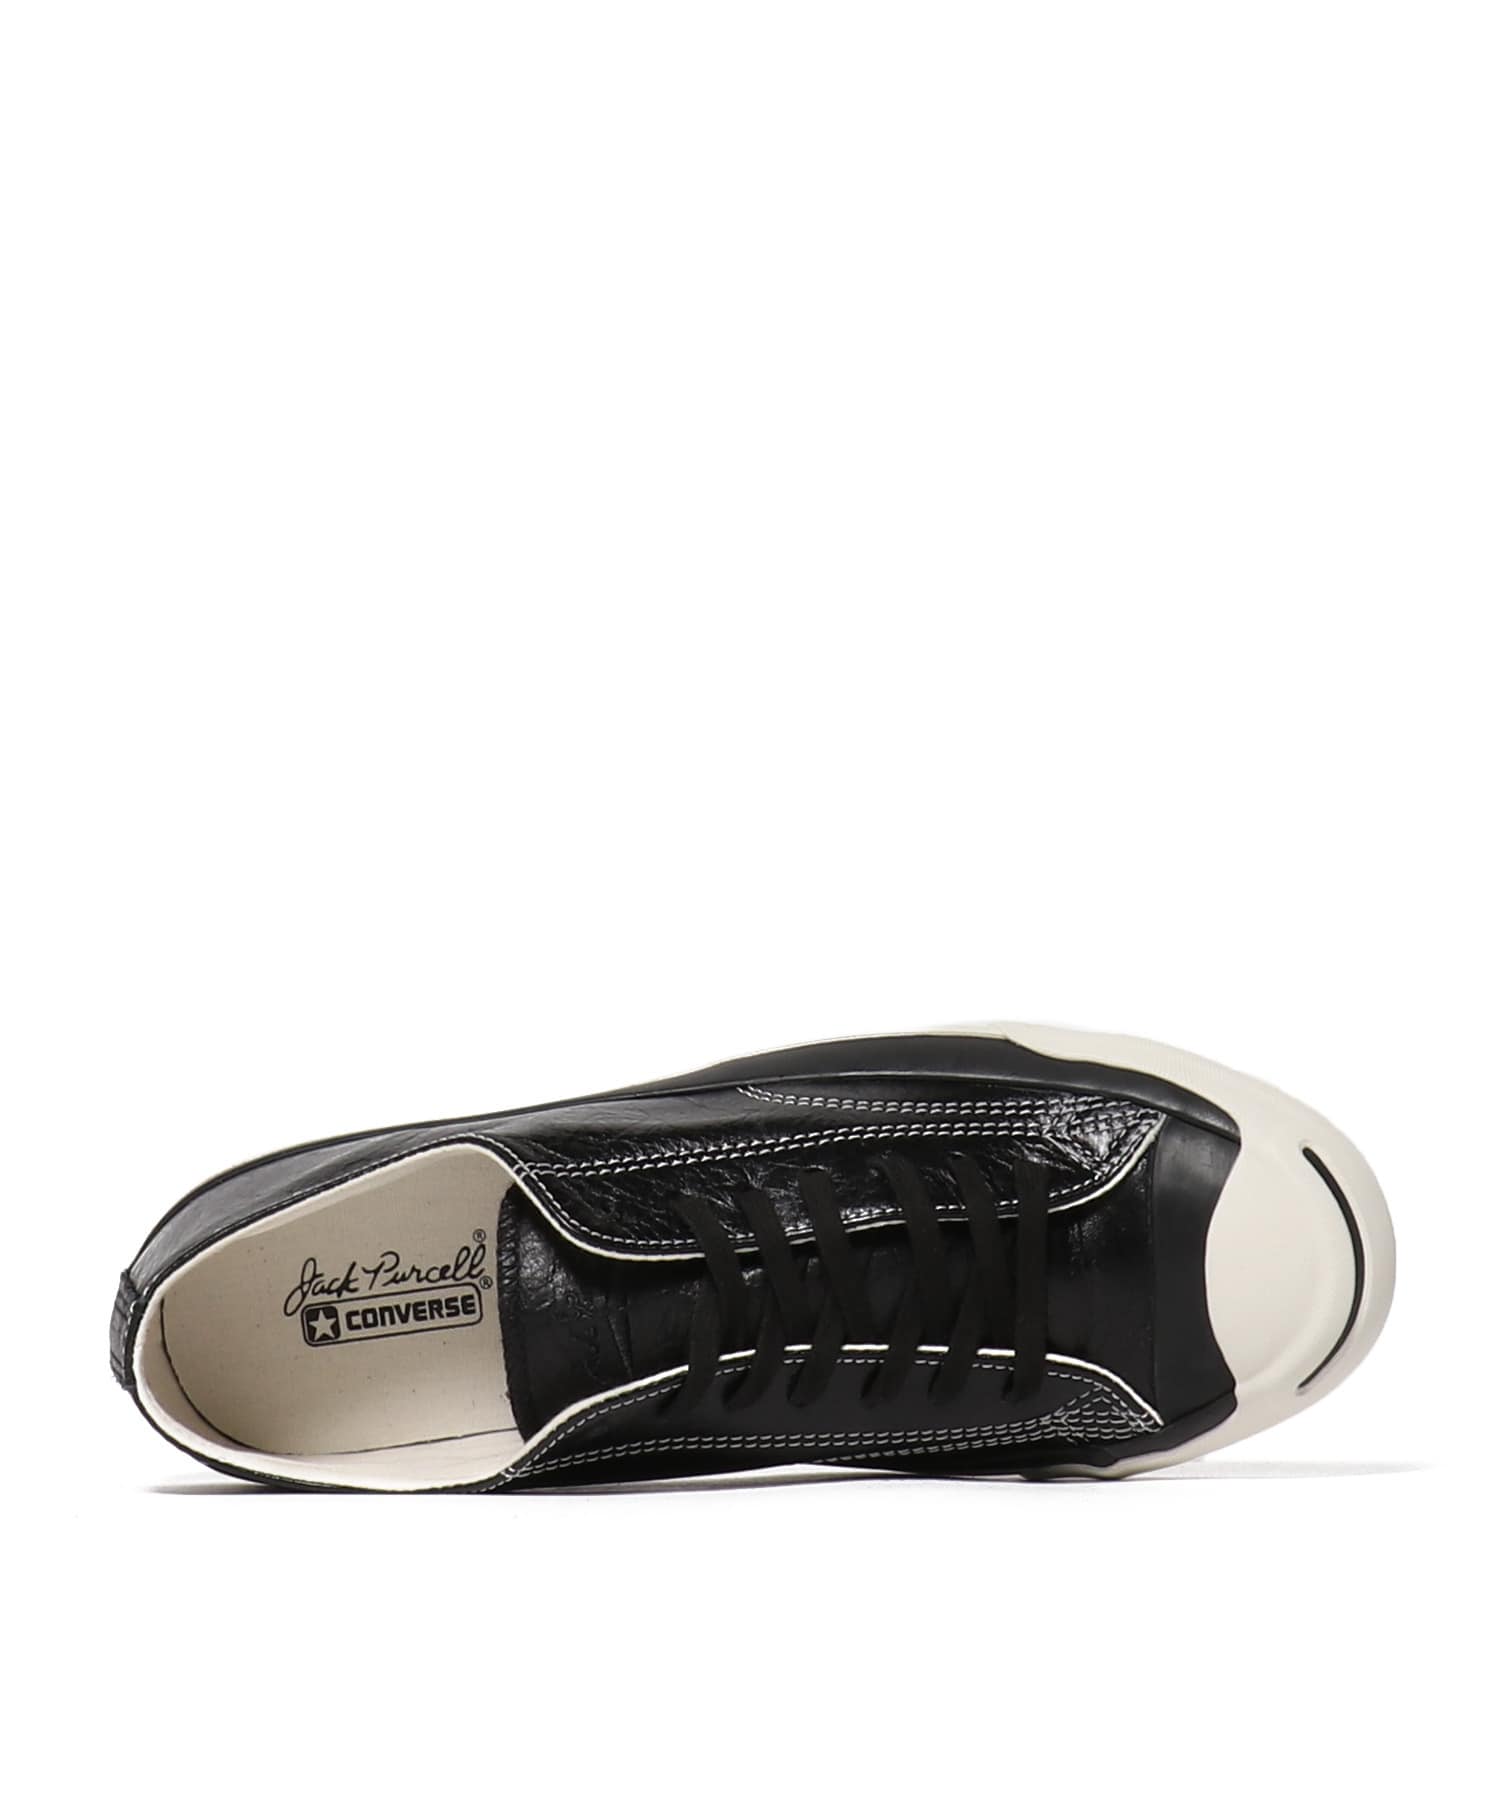 JACK PURCELL TORNATLEATHER 詳細画像 ブラック 3